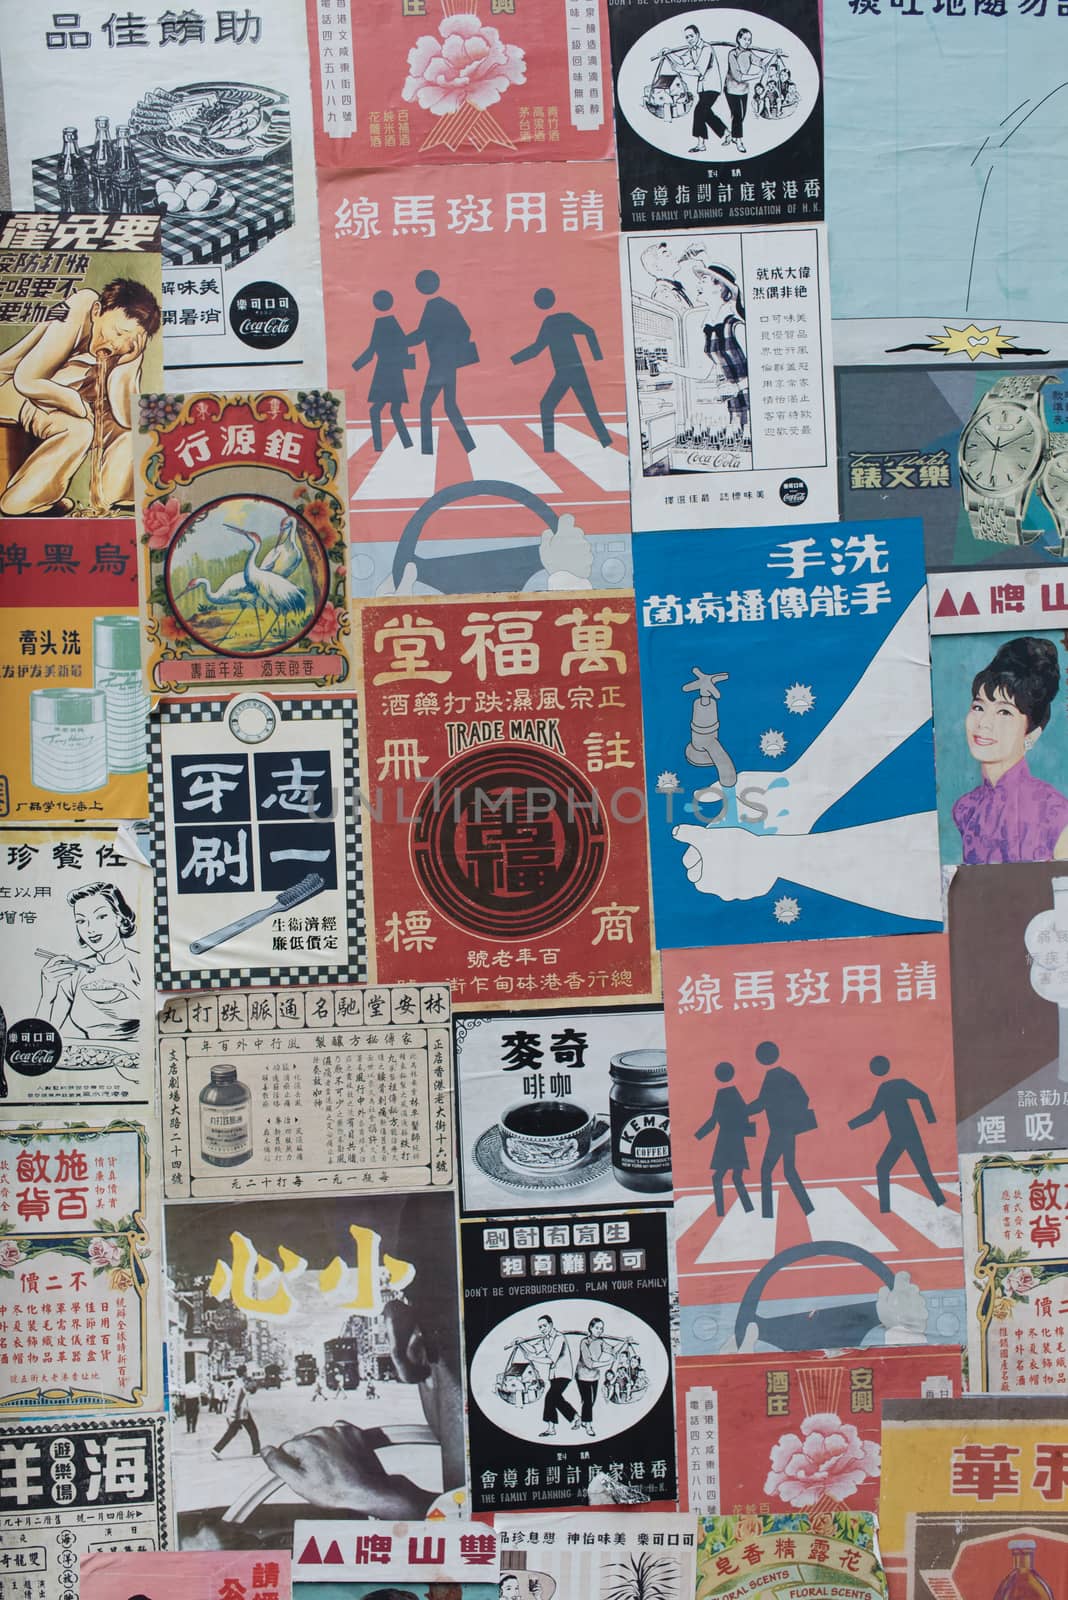 China retro and vintage advertising posters by MCVSN